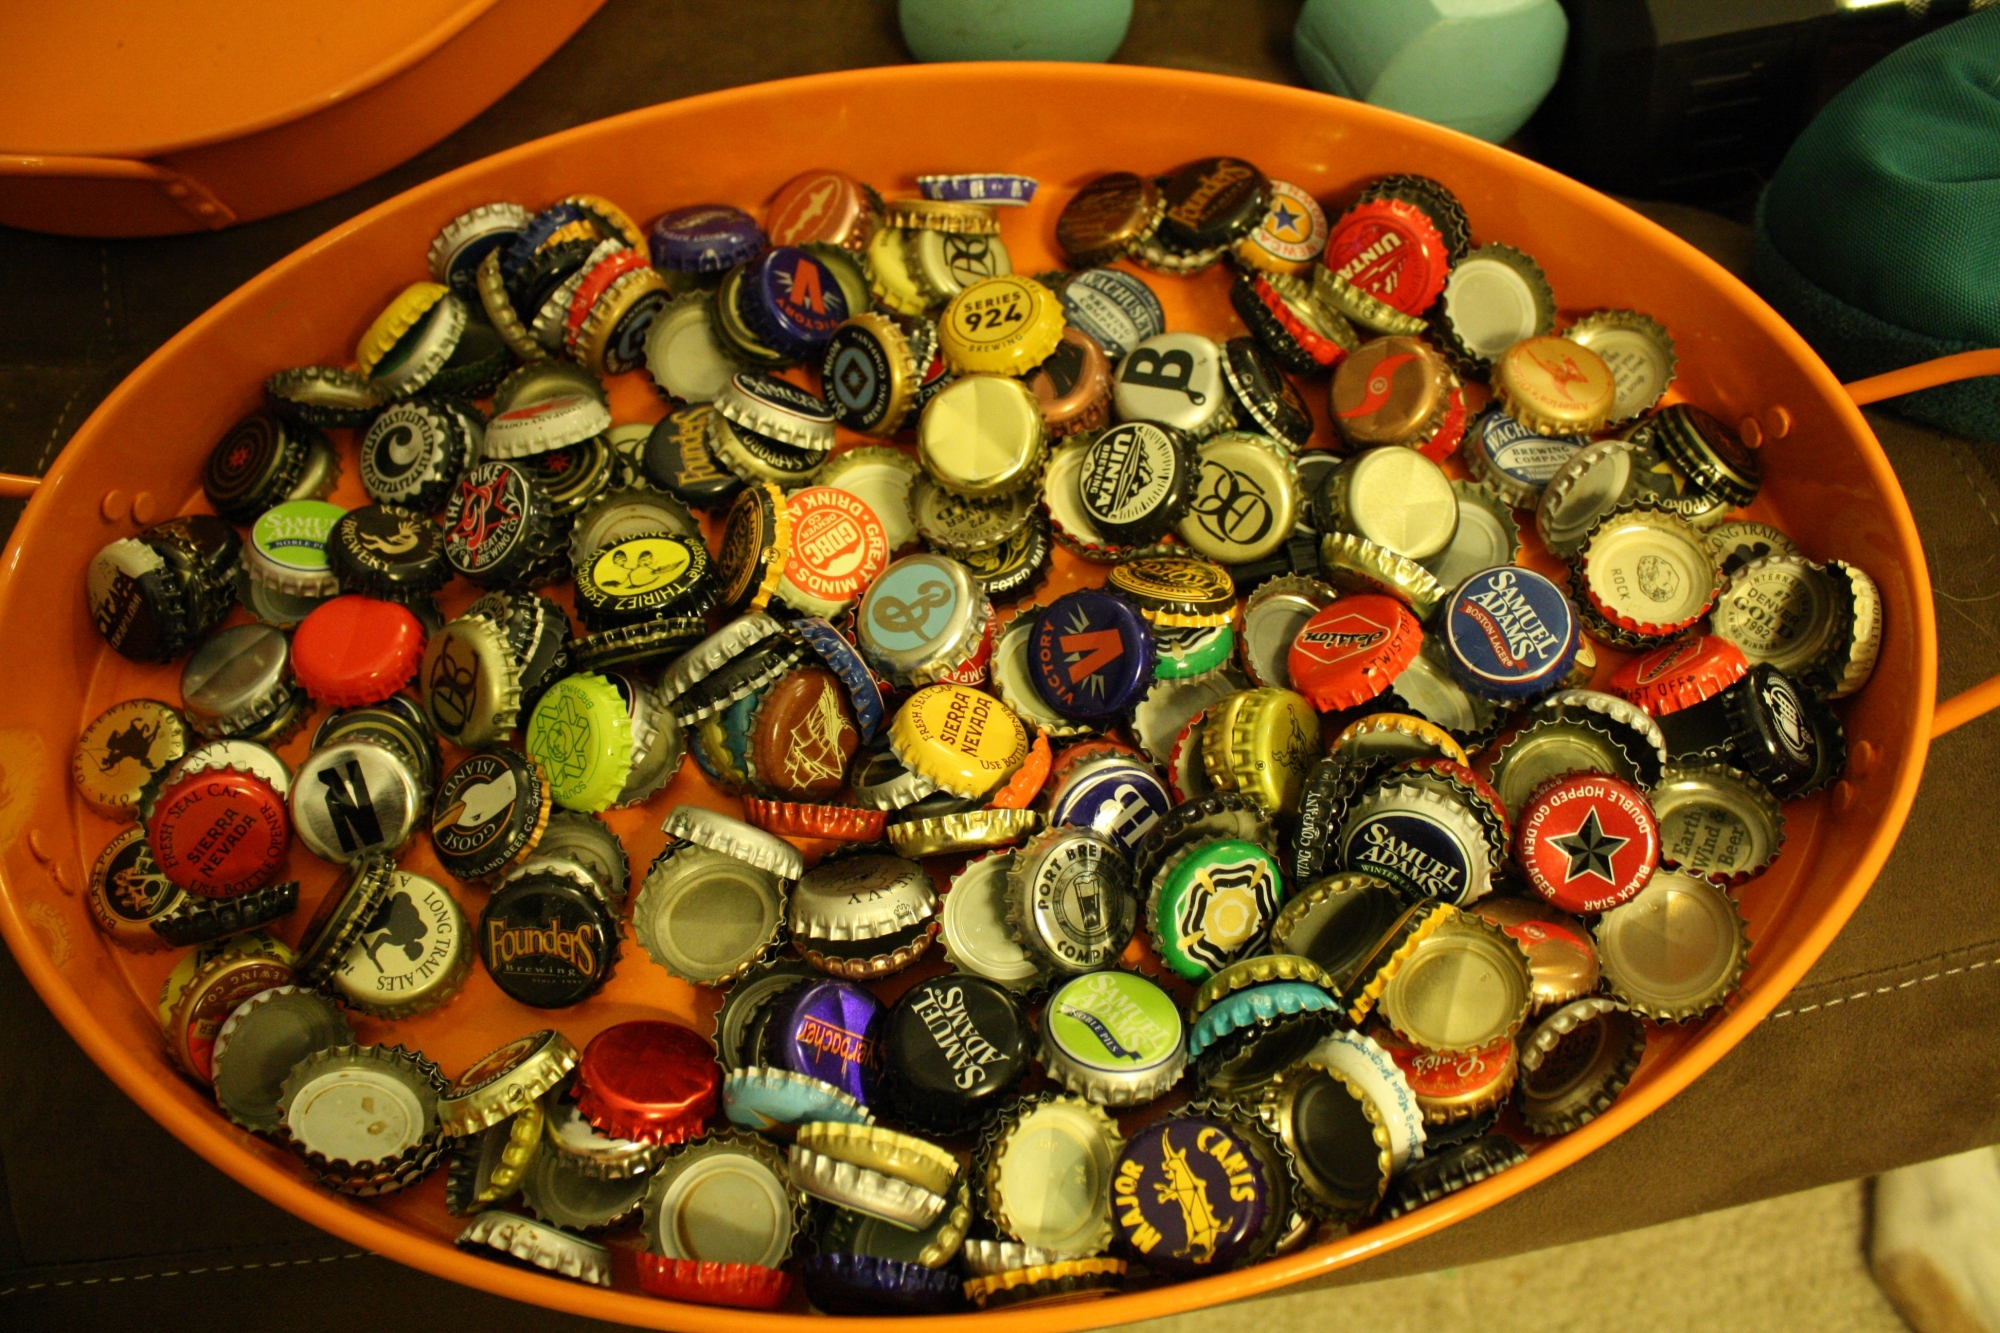 Keg Works Covered an office wall with over 60,000 Bottle Caps